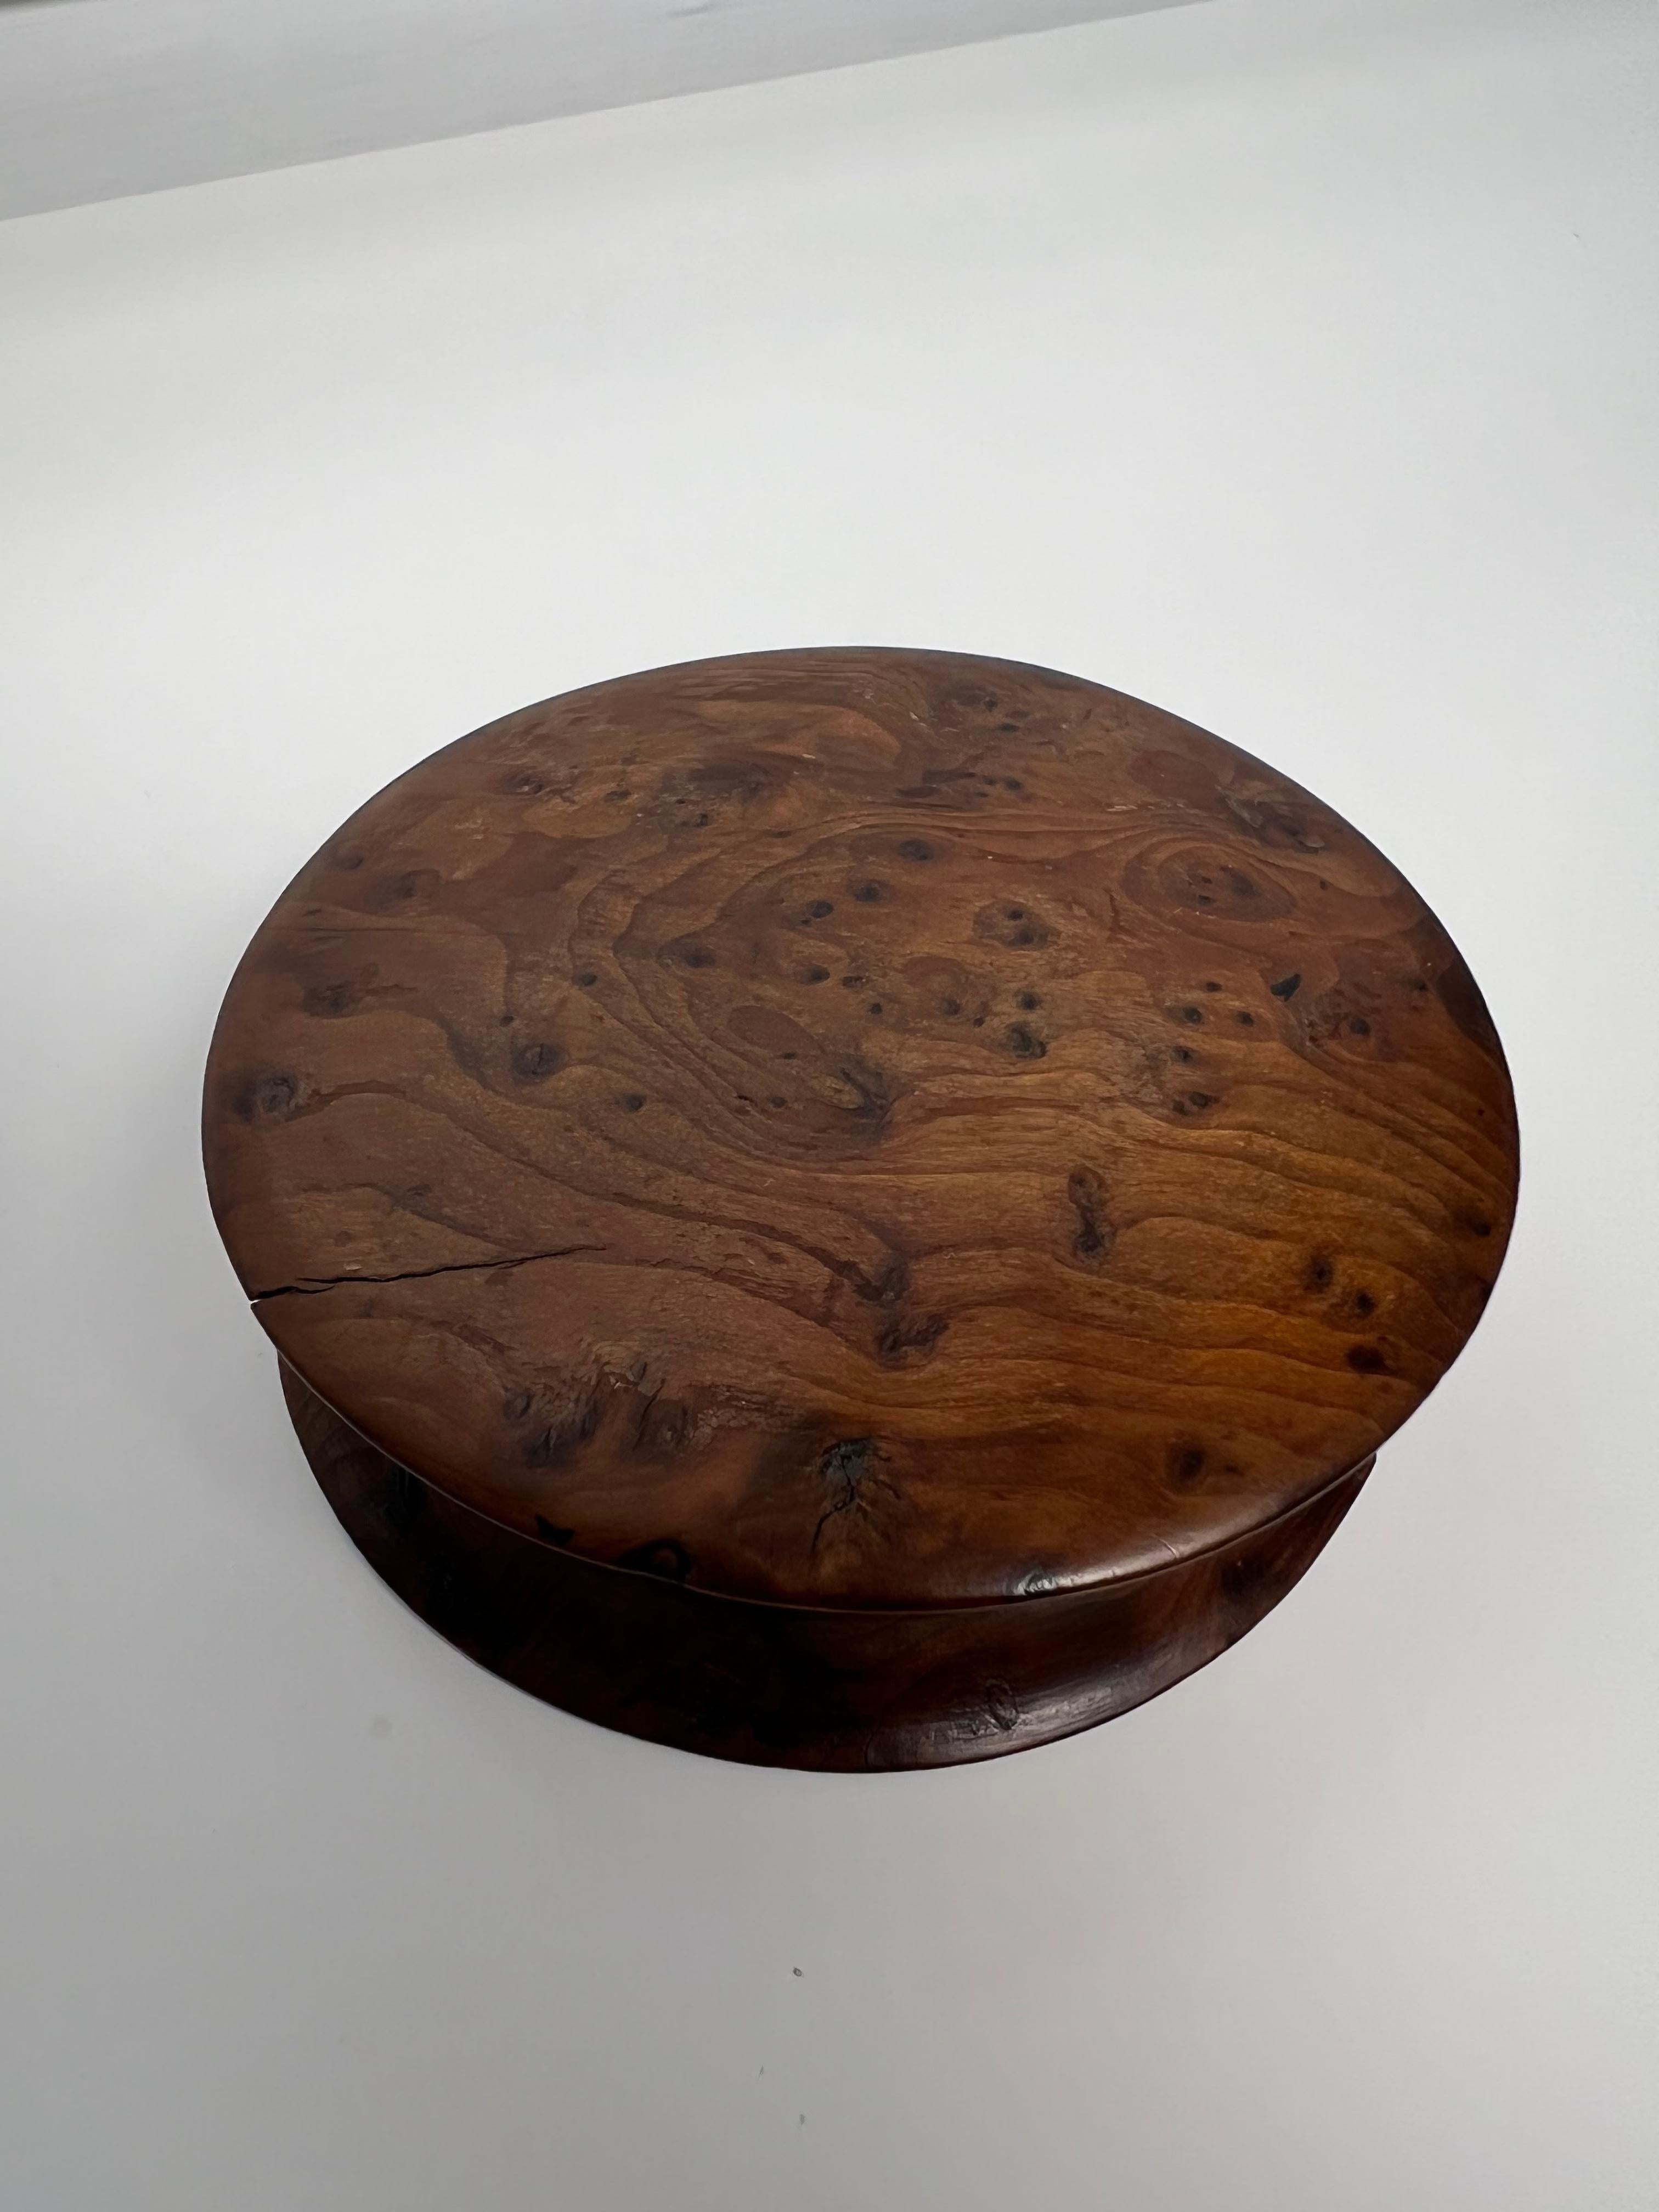 English round burl walnut snuff box with beautiful grain possibly Yew wood. This is a nice looking snuff box that would be great for any collector.